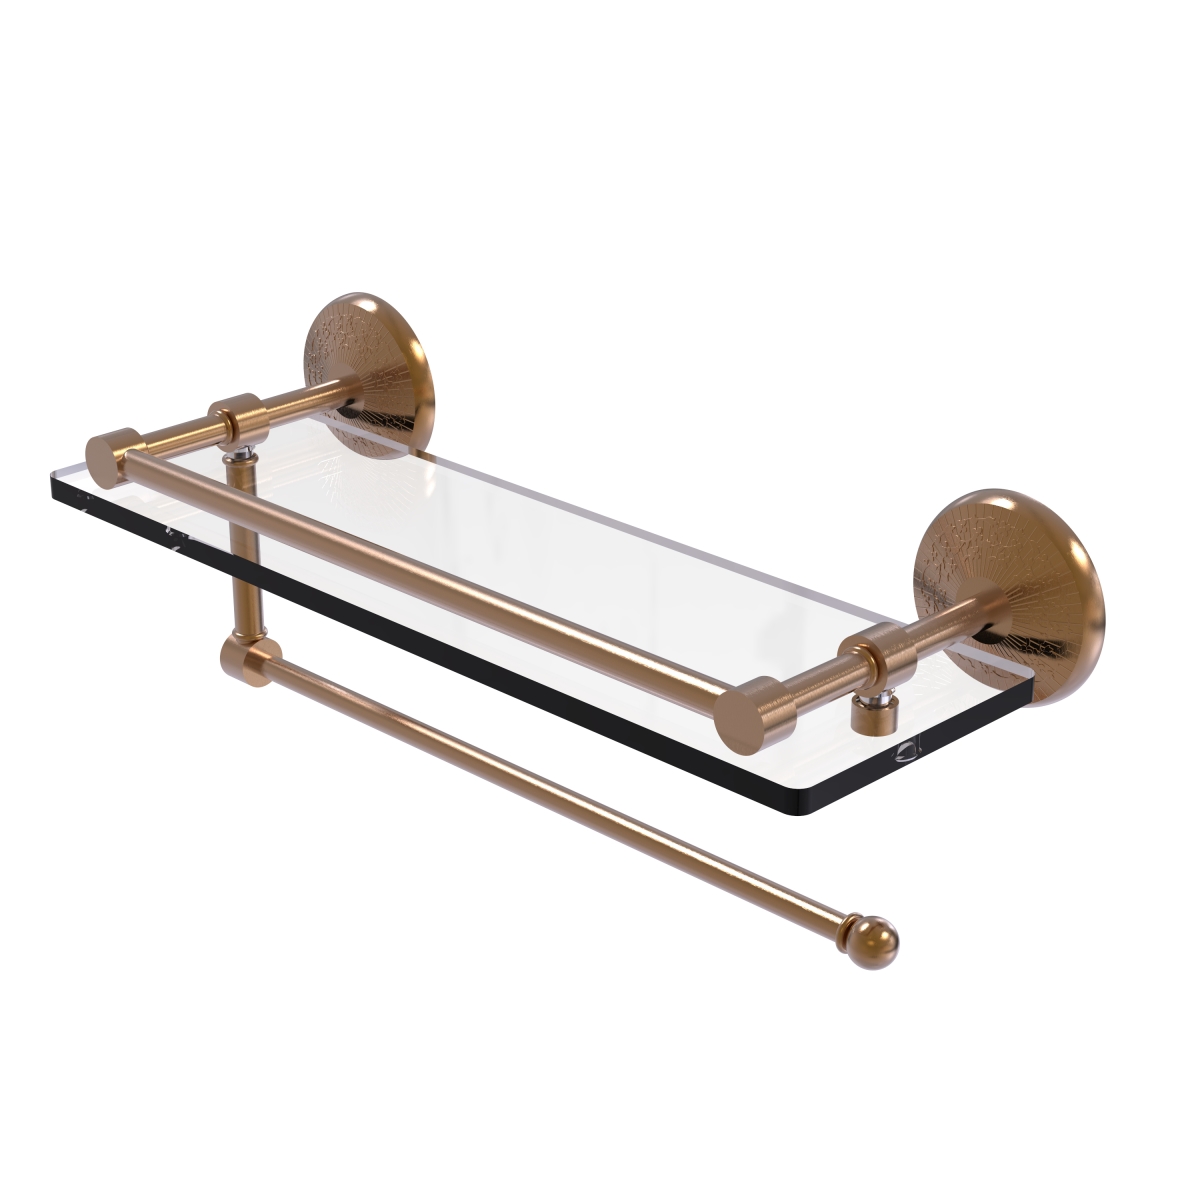 Pmc-1pt-16-gal-bbr Prestige Monte Carlo Collection Paper Towel Holder With 16 In. Gallery Glass Shelf, Brushed Bronze